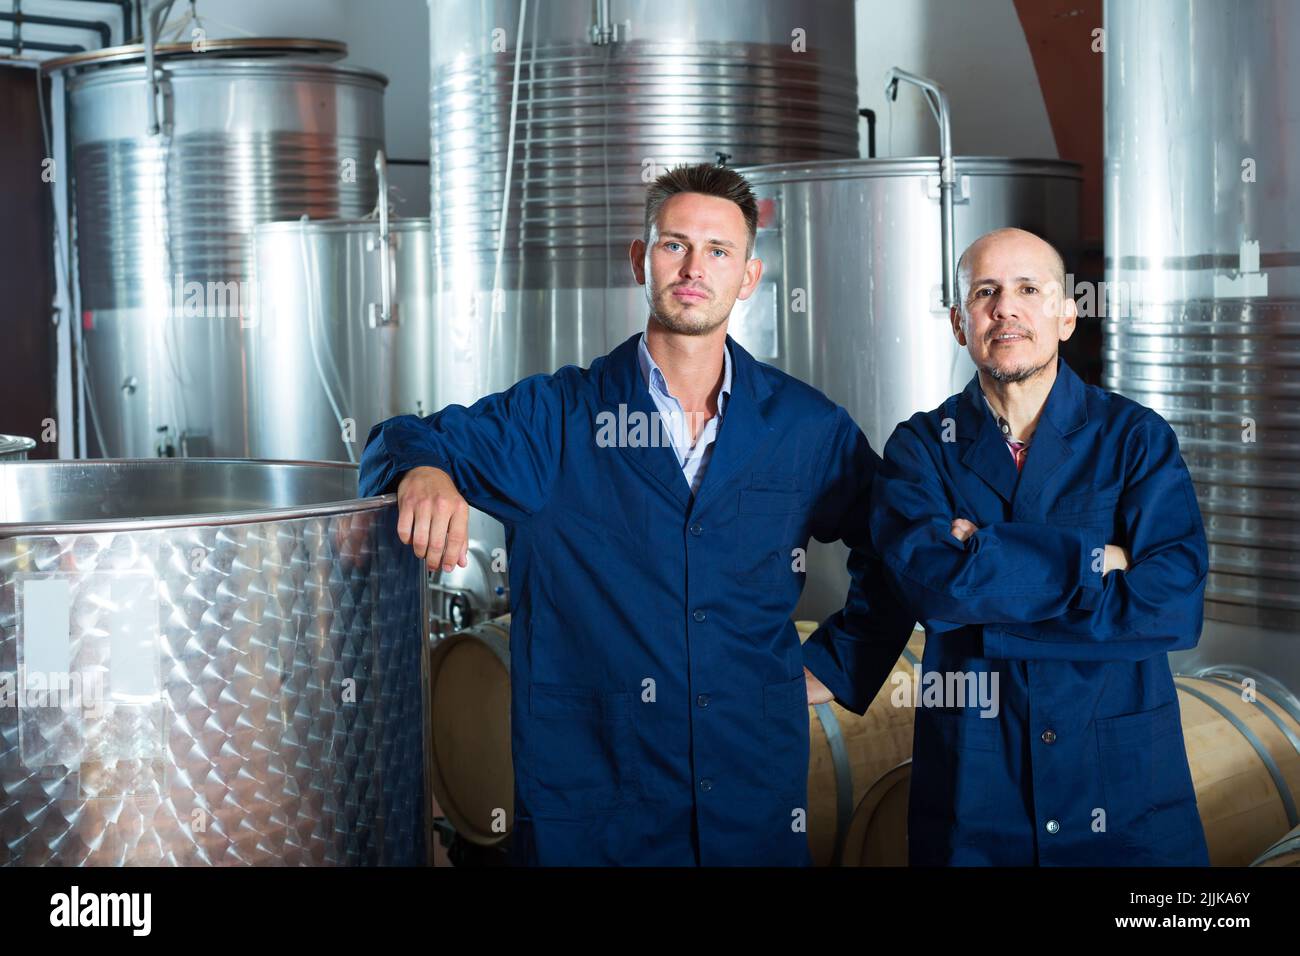 Two friendly men in uniforms standing in winery fermentation compartment Stock Photo